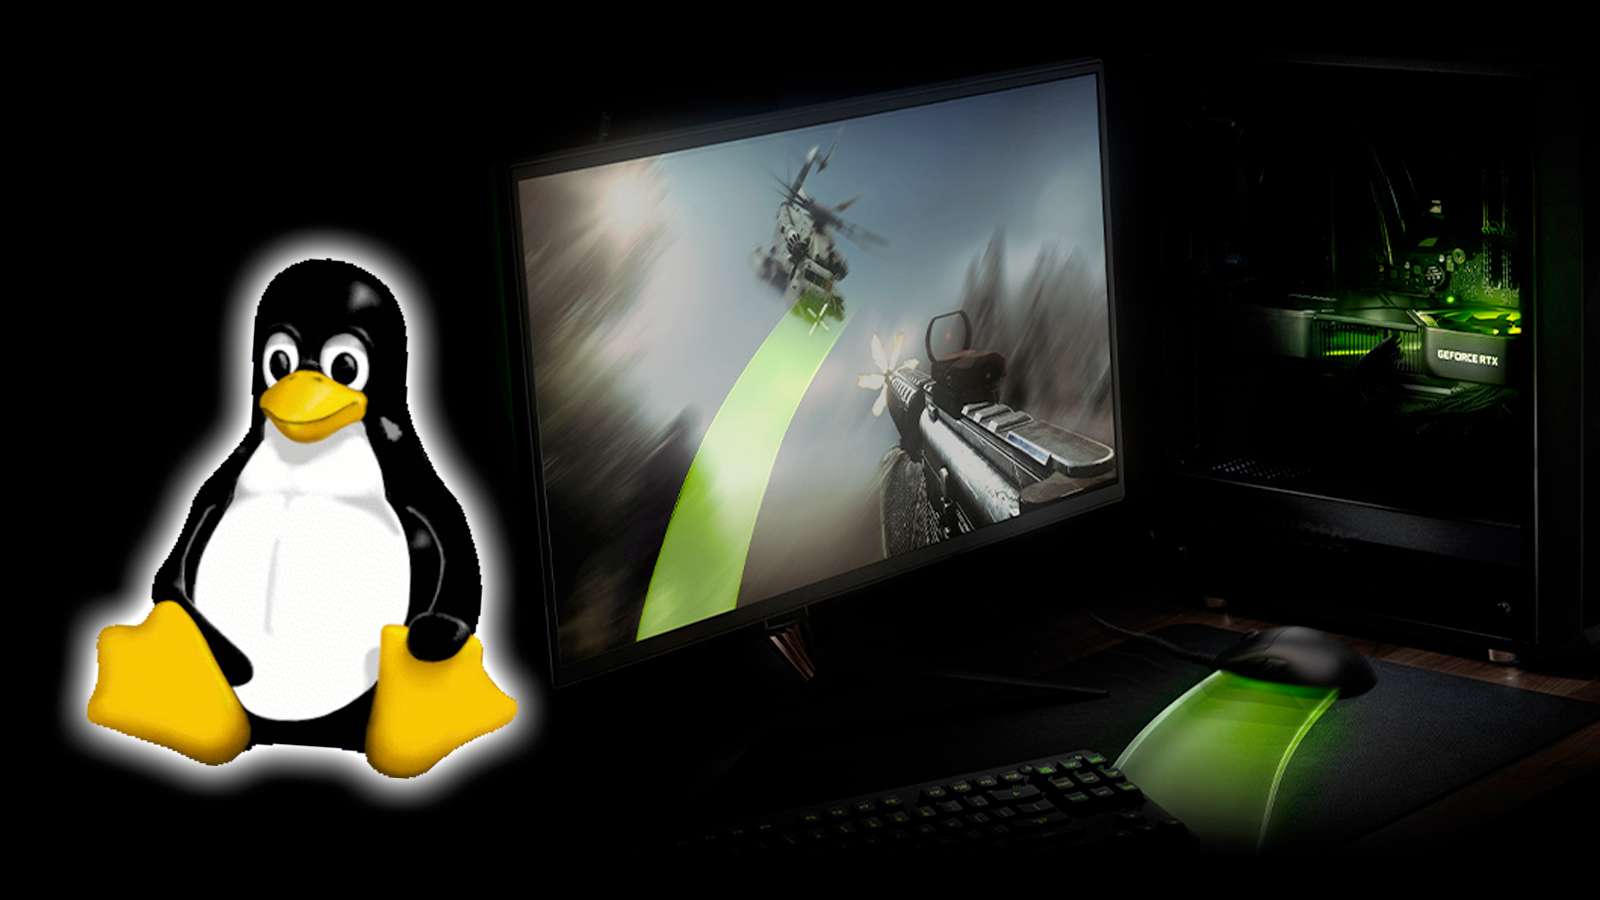 linux tux logo with nvidia art for reflex